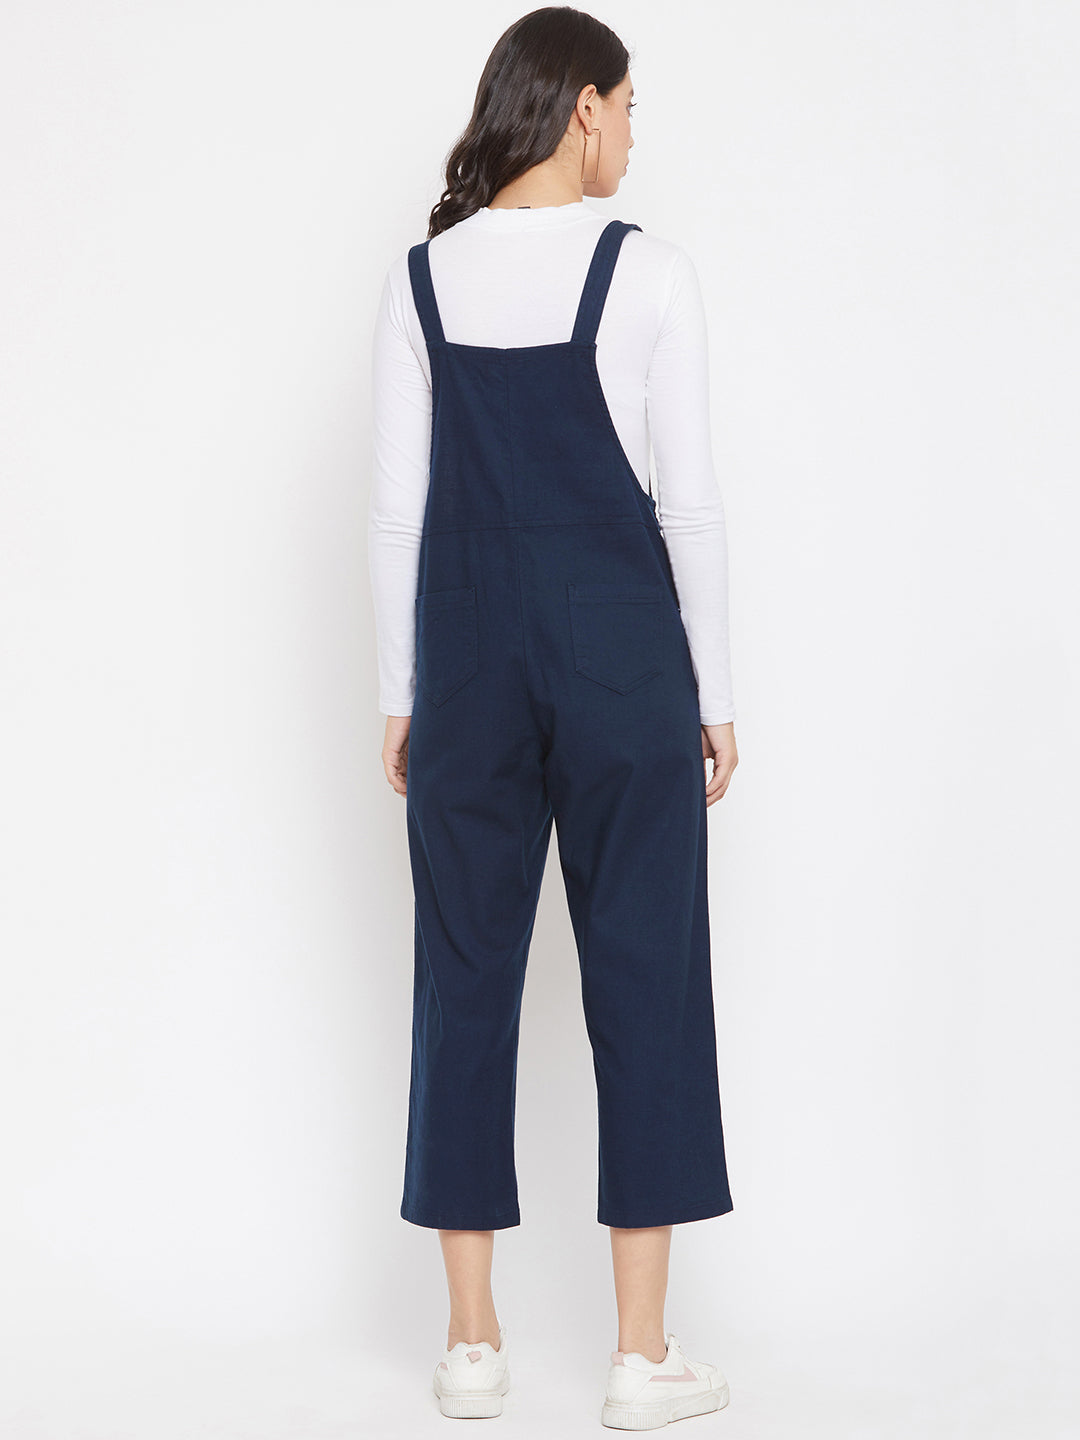 Navy Blue Solid Slim Fit Dungarees-Women Dungarees-Crimsoune Club